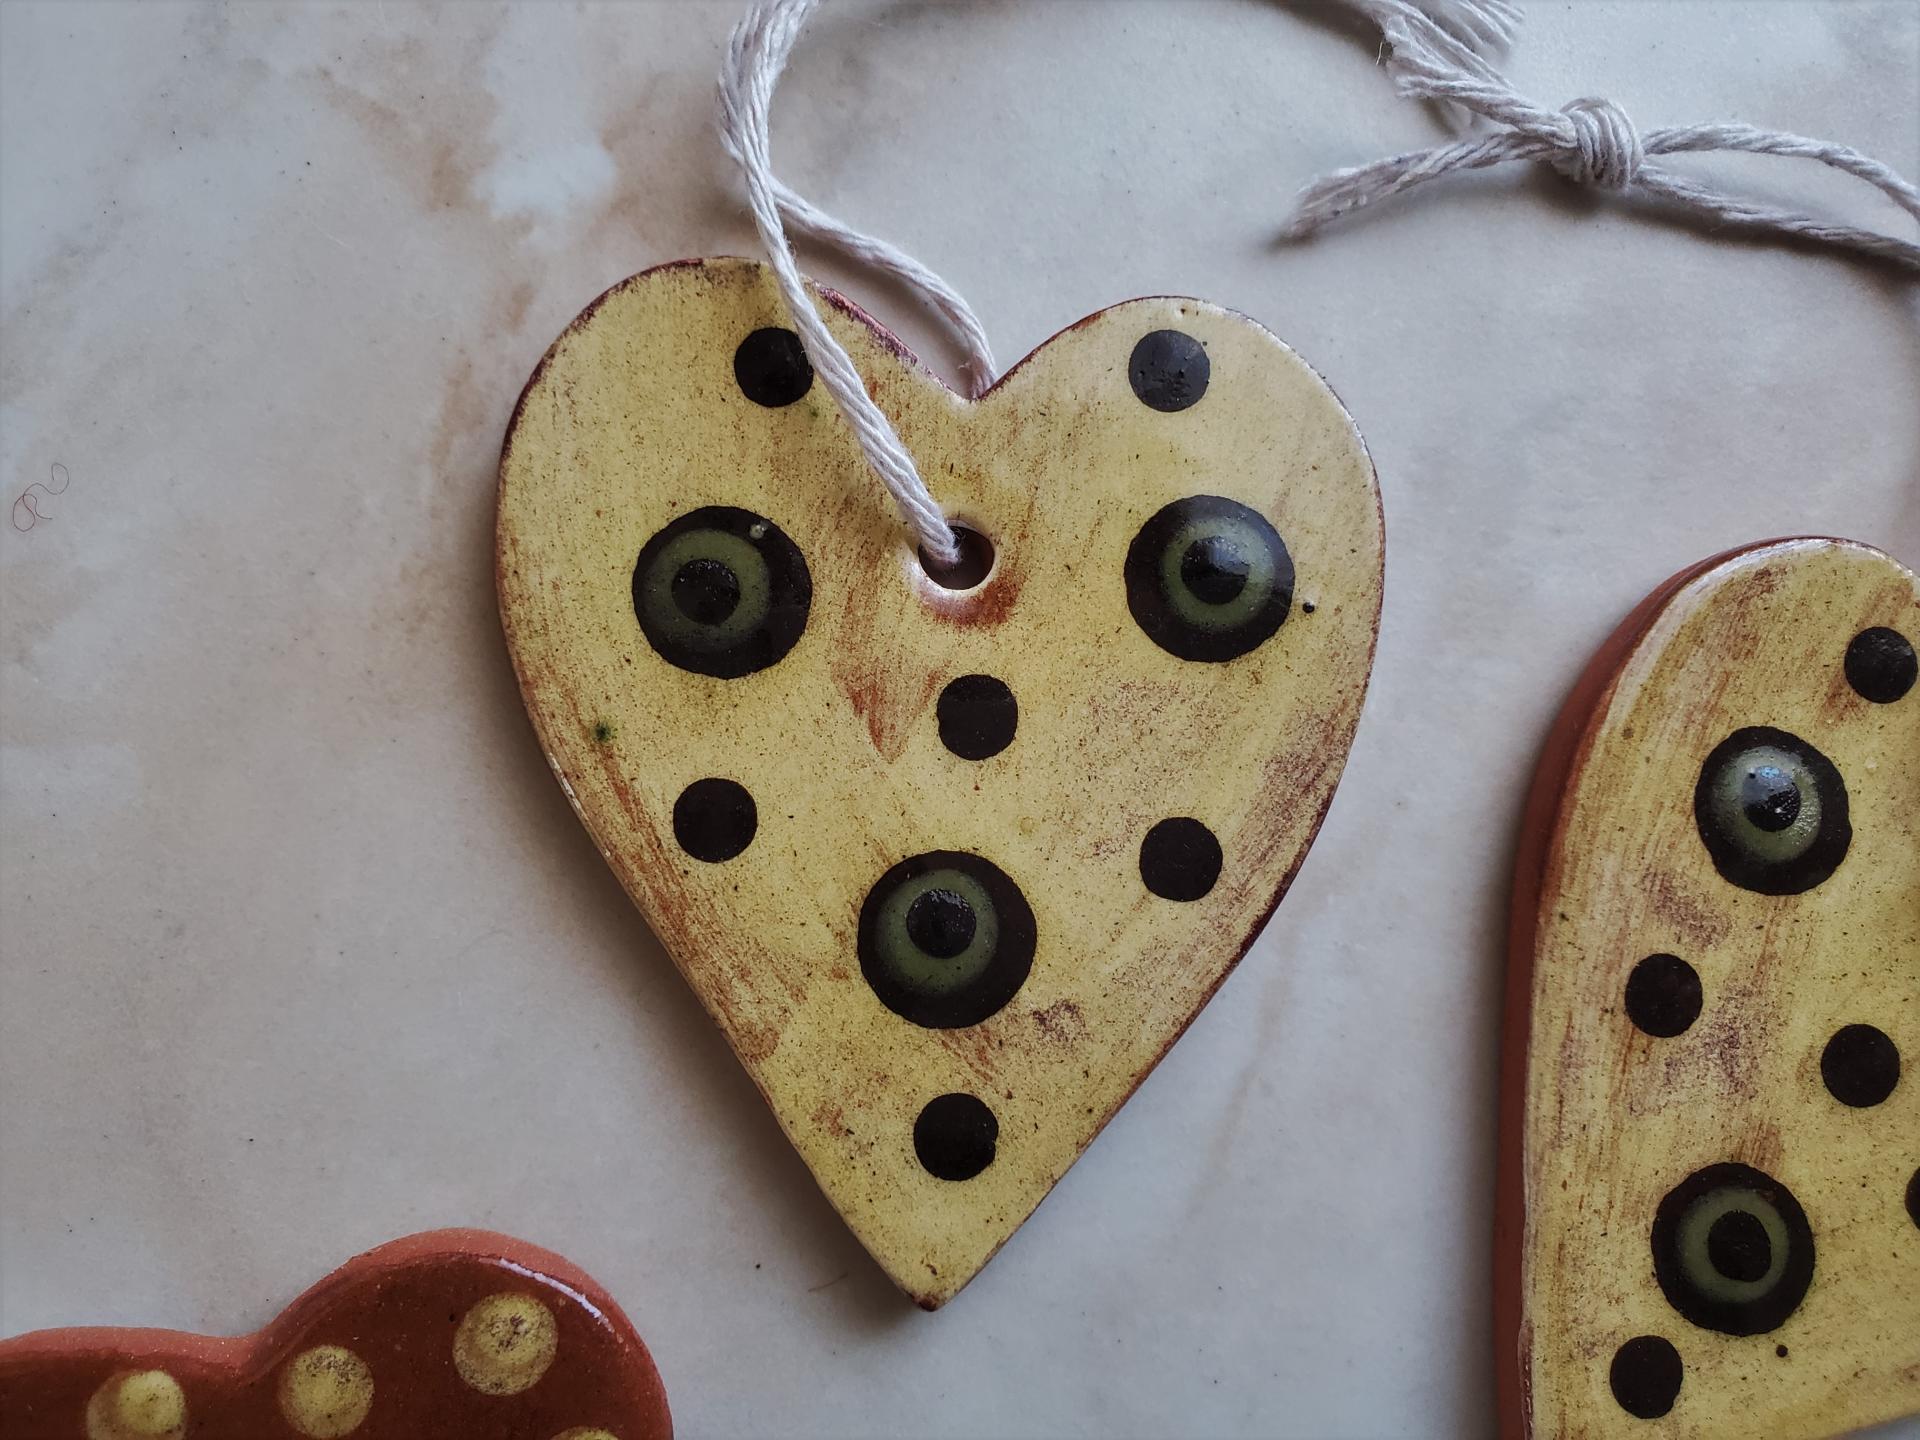 Set of Two Handcrafted Redware Heart Ornaments, Kulina Folk Art - Slip Decorated, Twine Strung